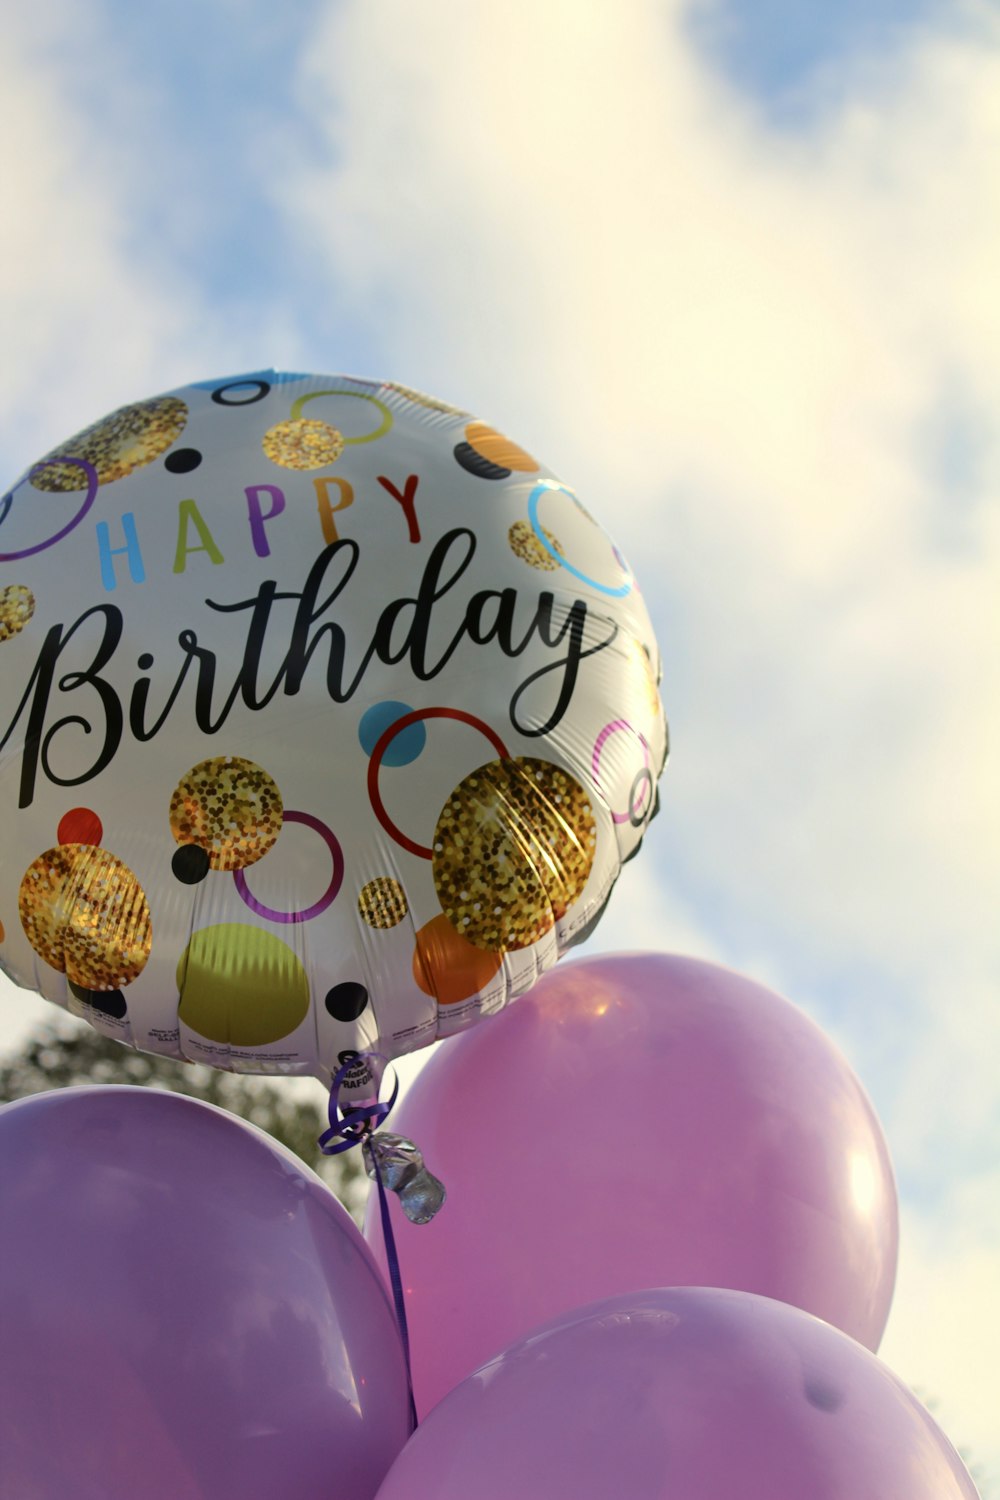 “Stunning Collection of Full 4K Birthday Balloon Images – Over 999 to Choose From!”